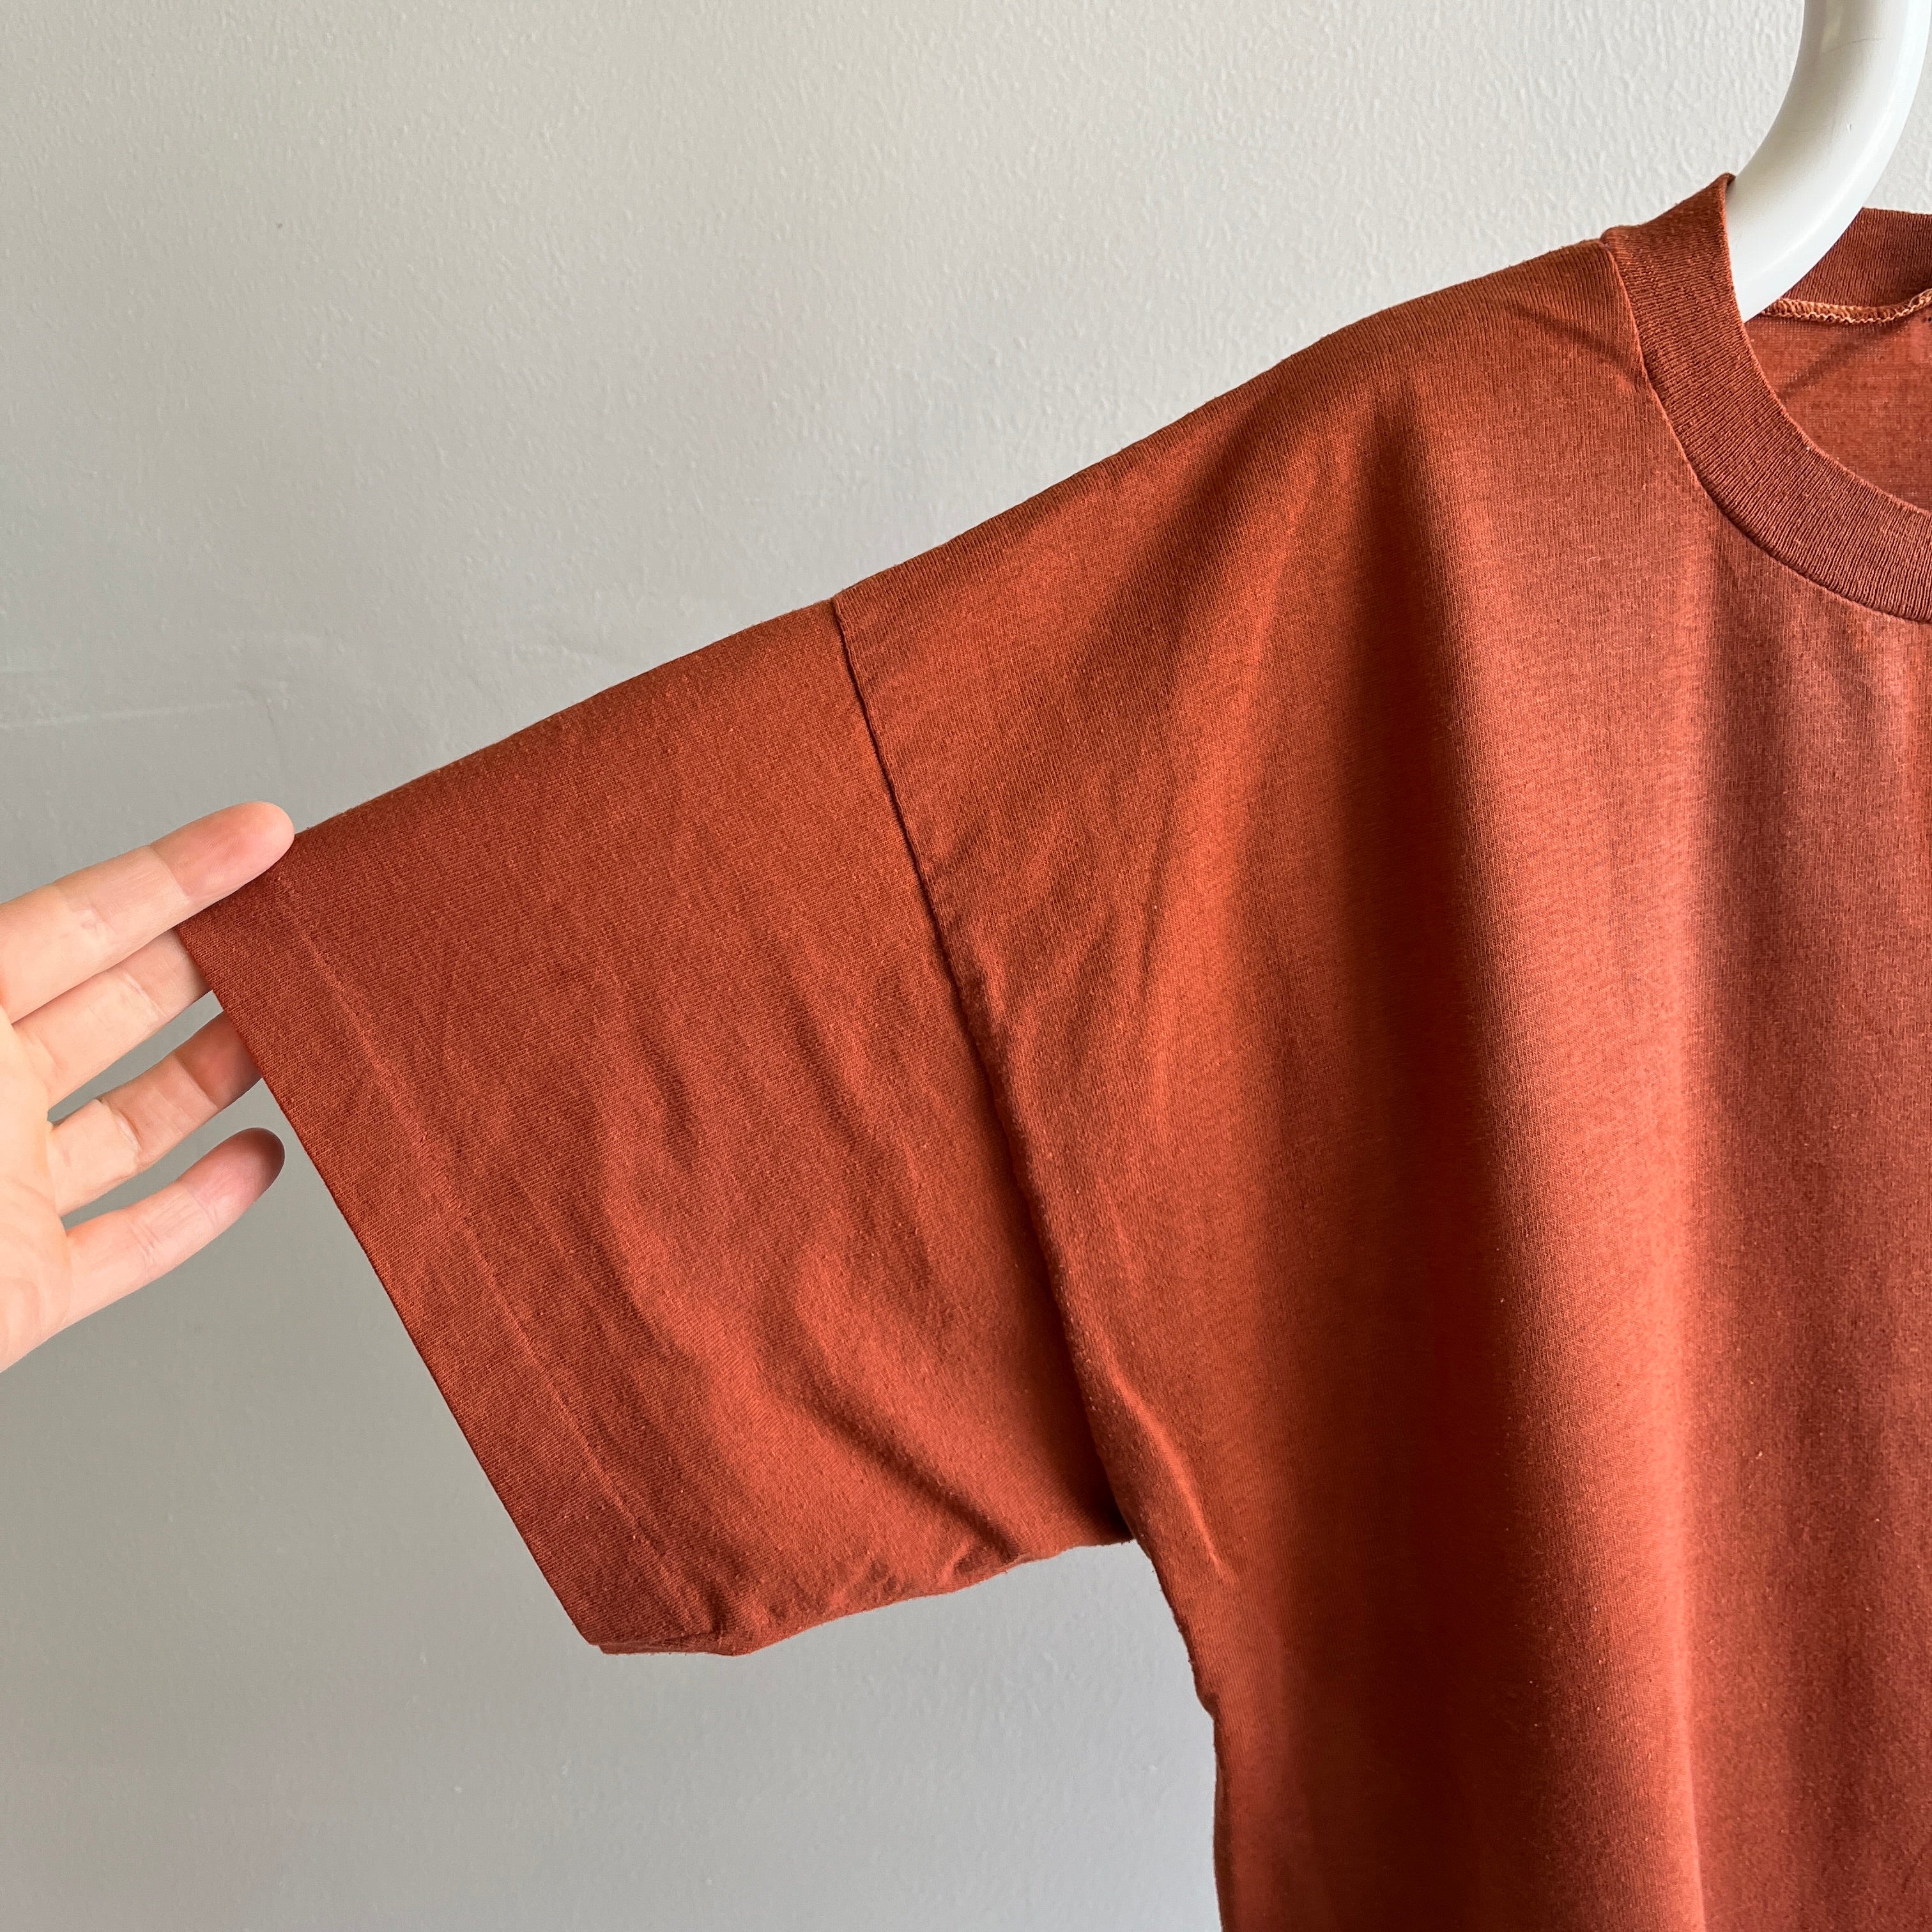 1980/90s Boxy Rusty Blank T-Shirt - Made in Canada